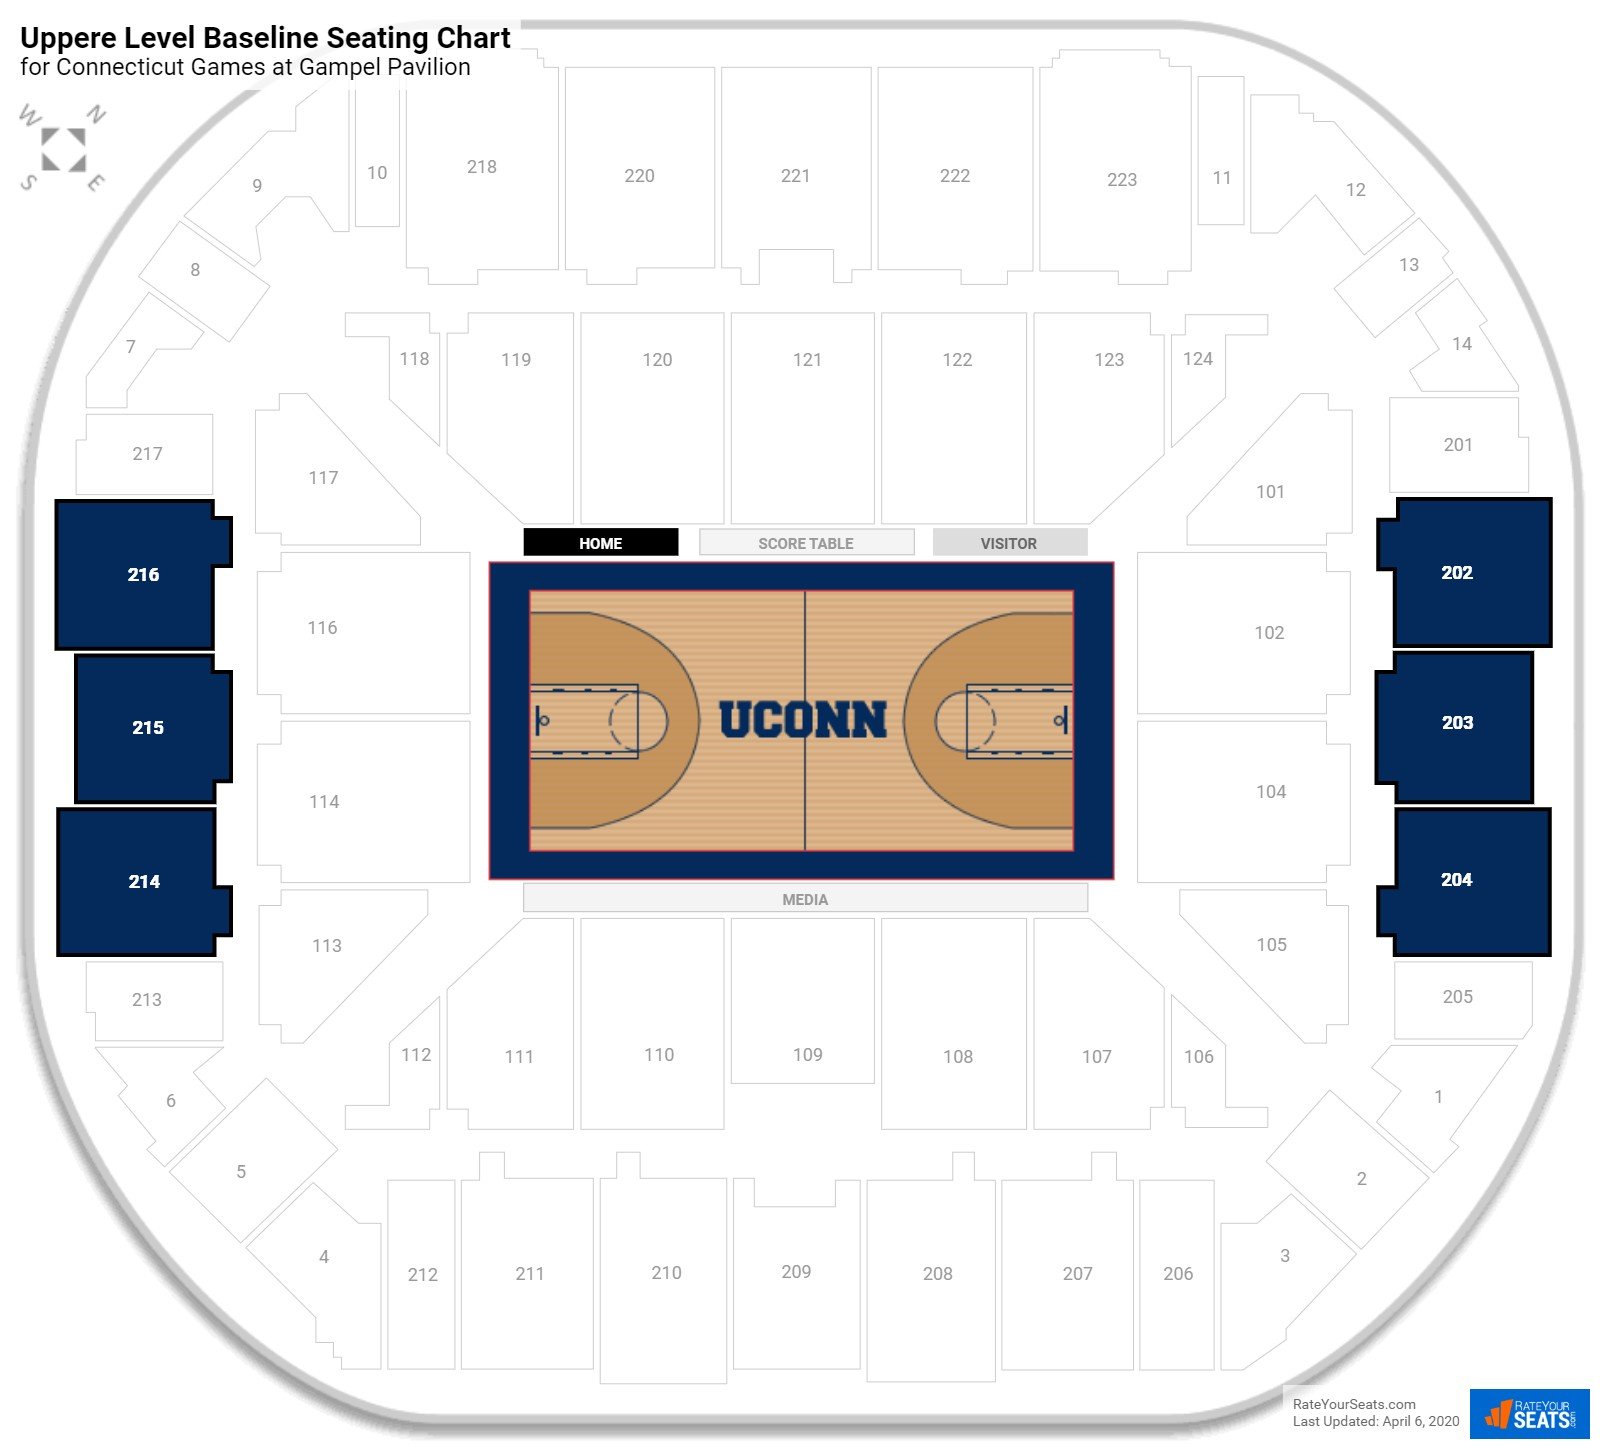 Gampel Pavilion (Connecticut) Seating Guide - RateYourSeats.com